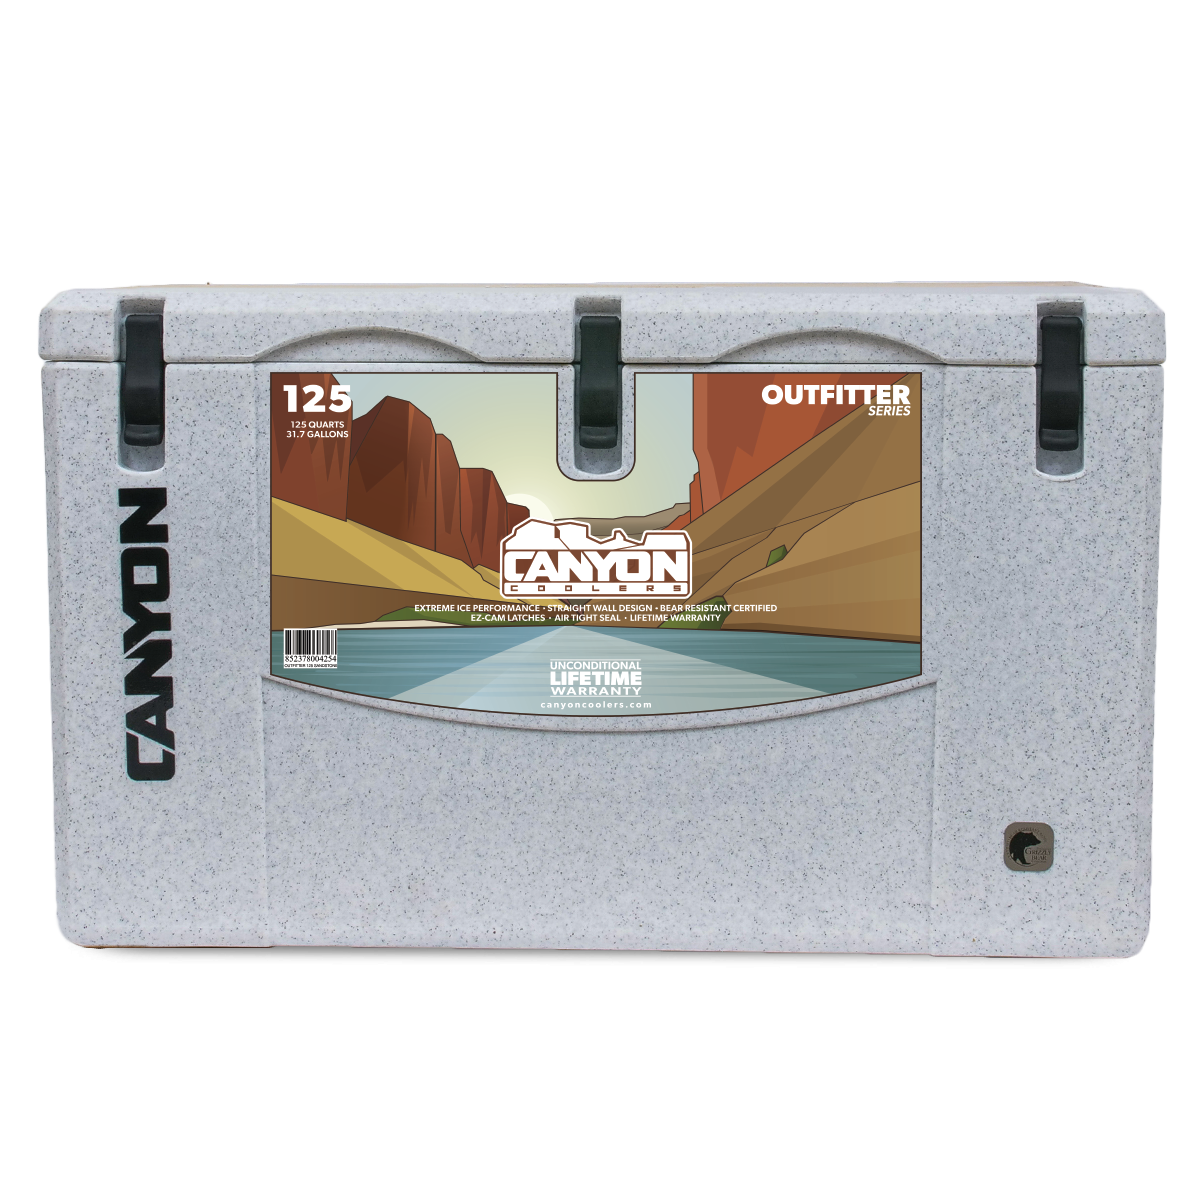 A Canyon Outfitter Series Cooler with a lid on it.